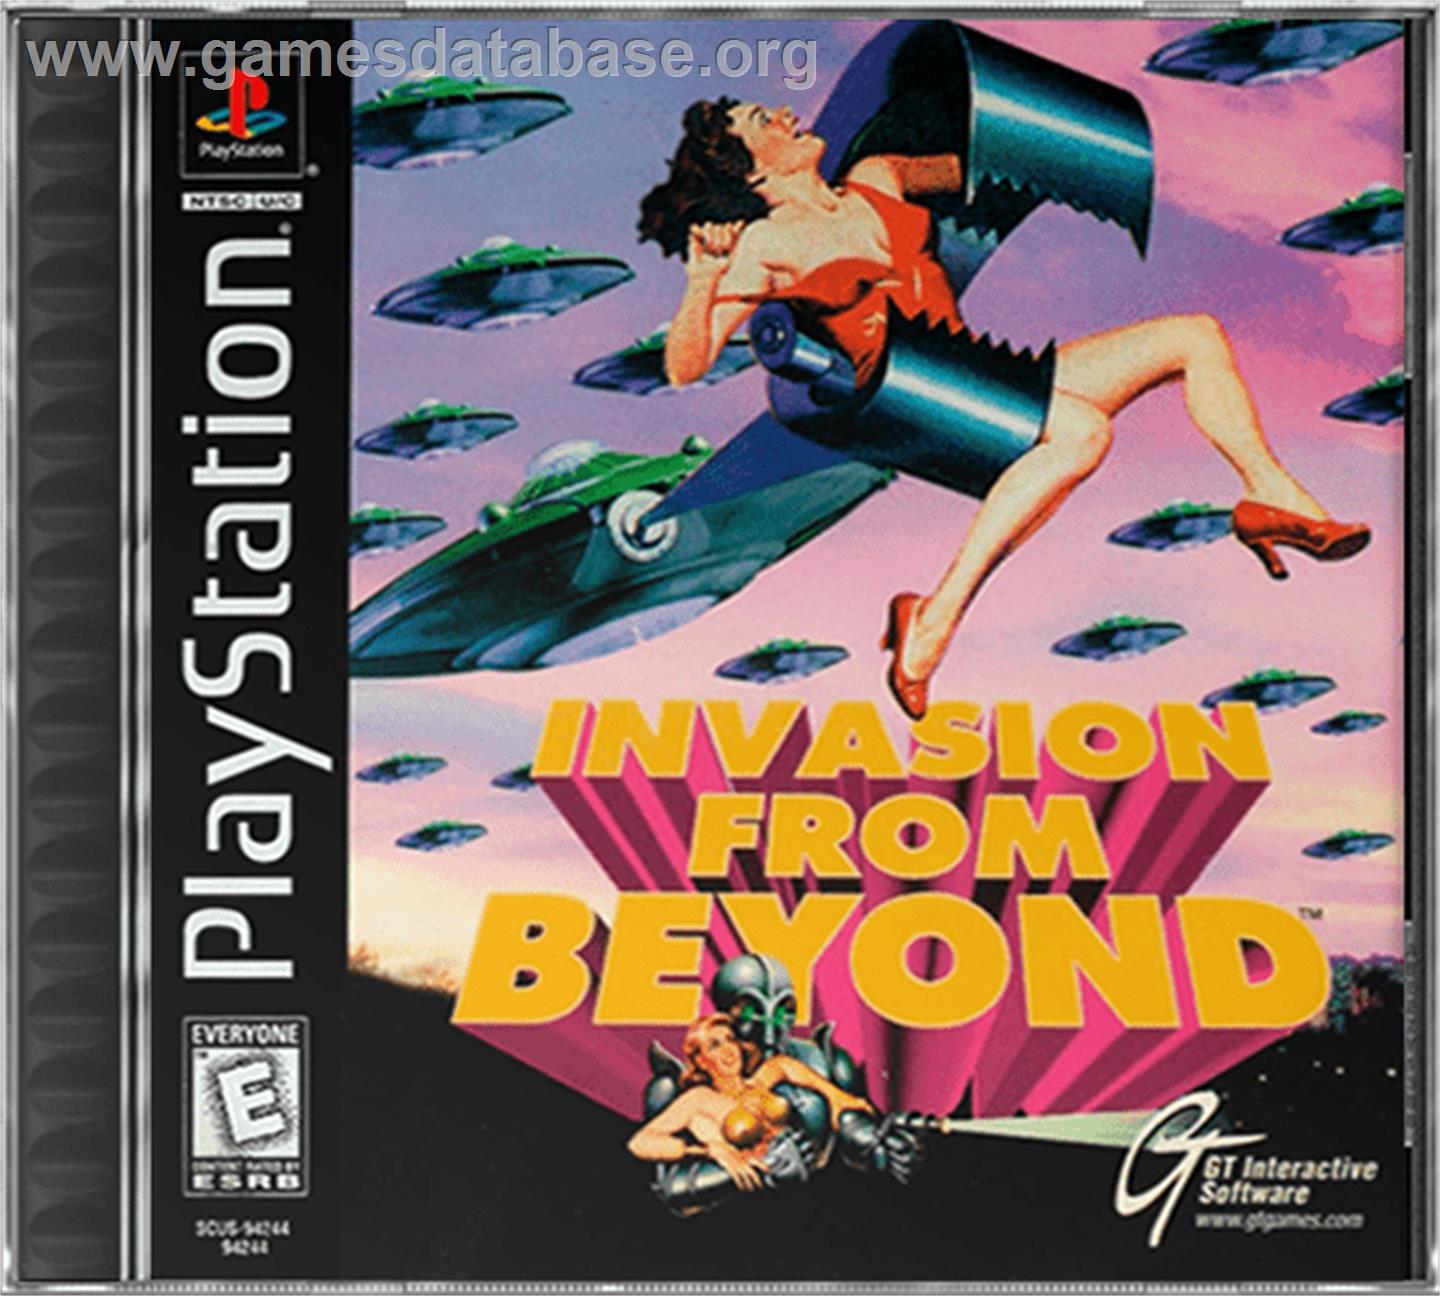 Invasion From Beyond - Sony Playstation - Artwork - Box